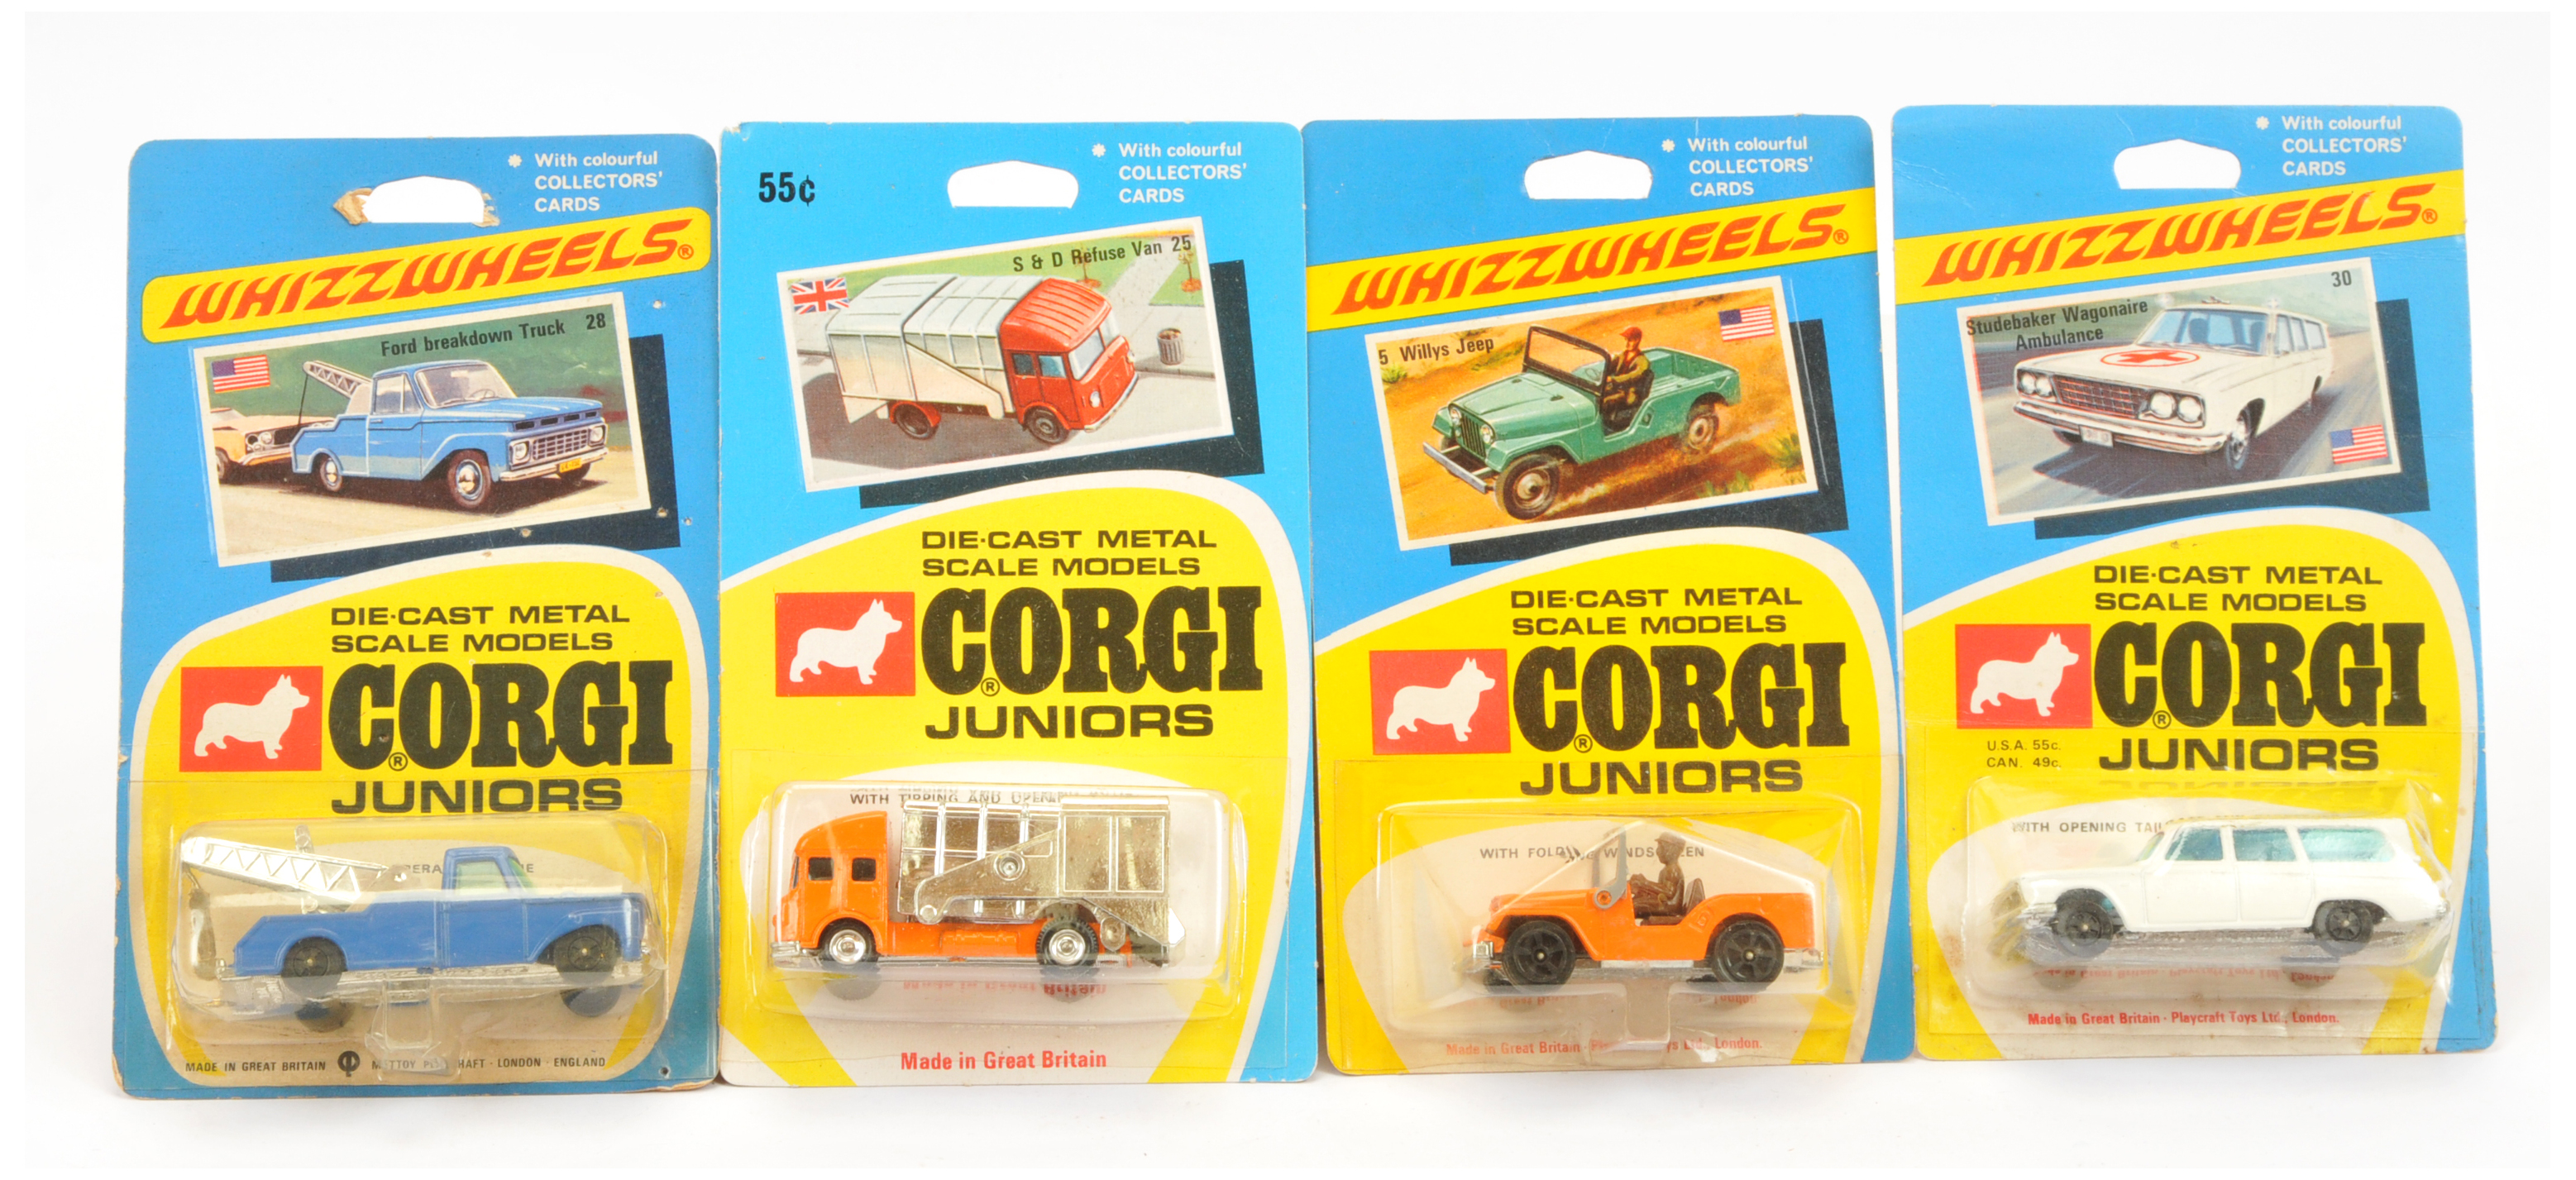 Corgi Toys Juniors Group Of 4 To Include (1) 5 Willy's Jeep - Orange, brown interior and figure, ...